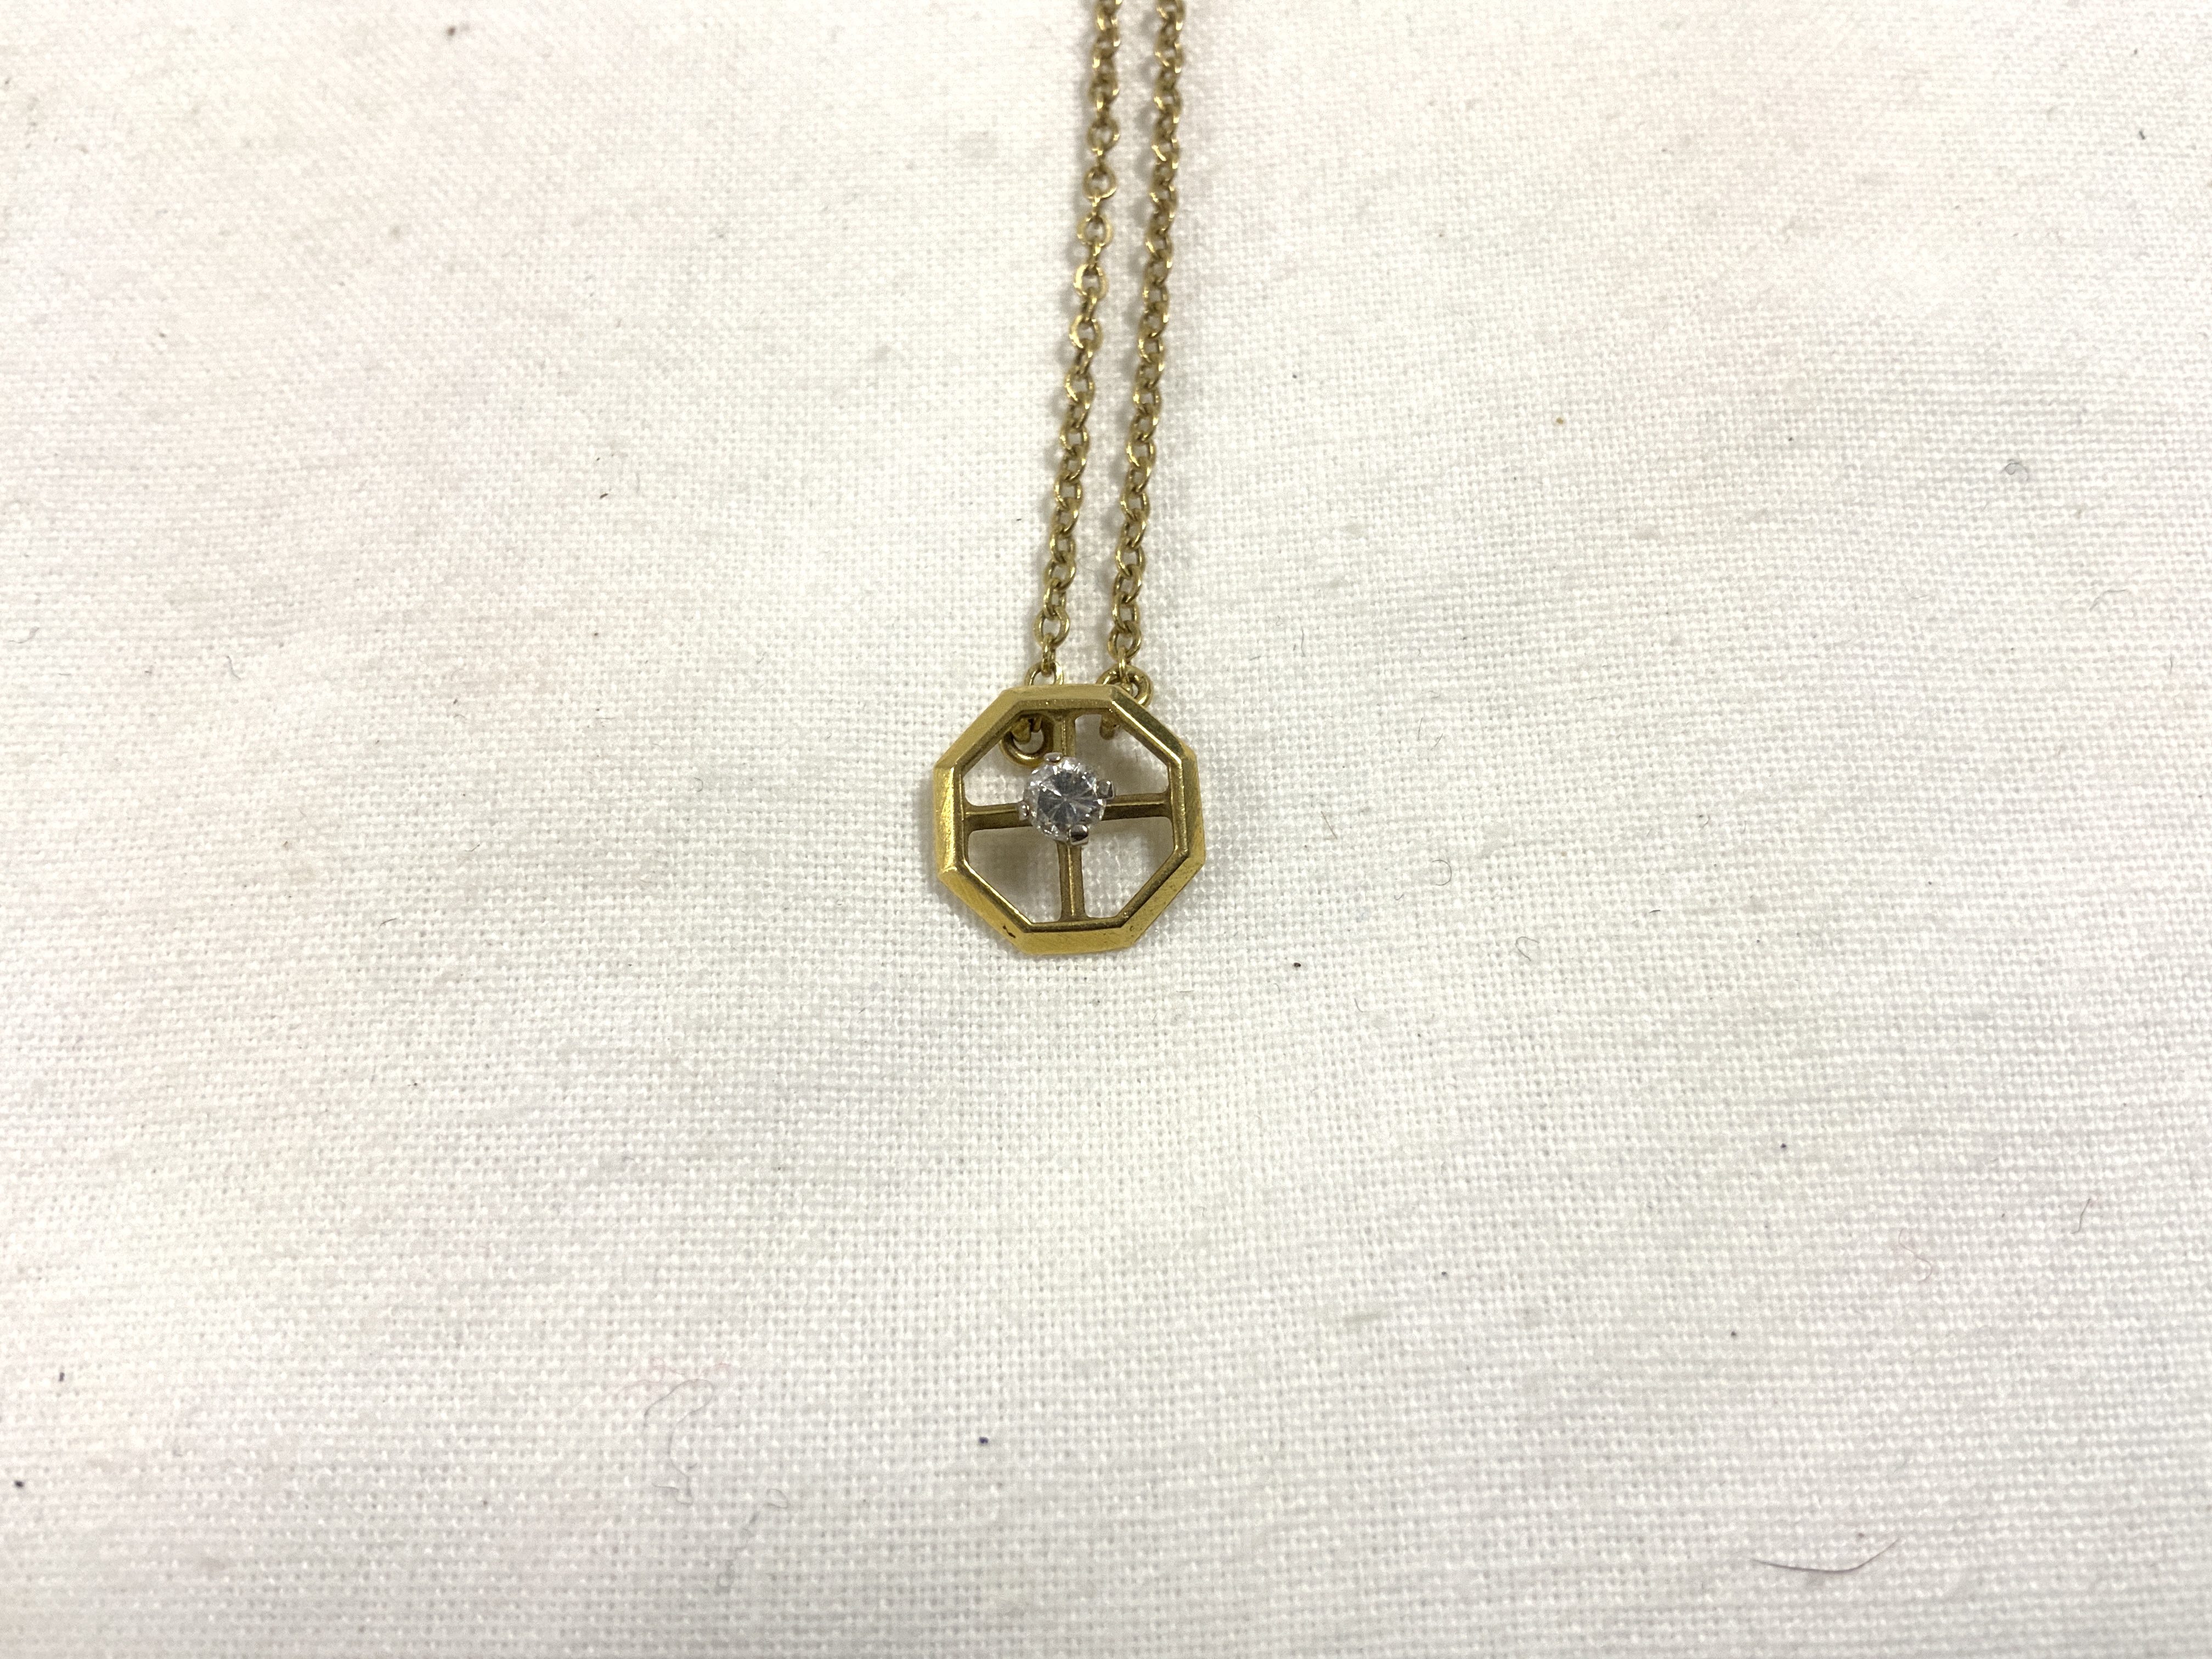 375 GOLD NECKLACE AND PENDANT WITH A DIAMOND - Image 3 of 5